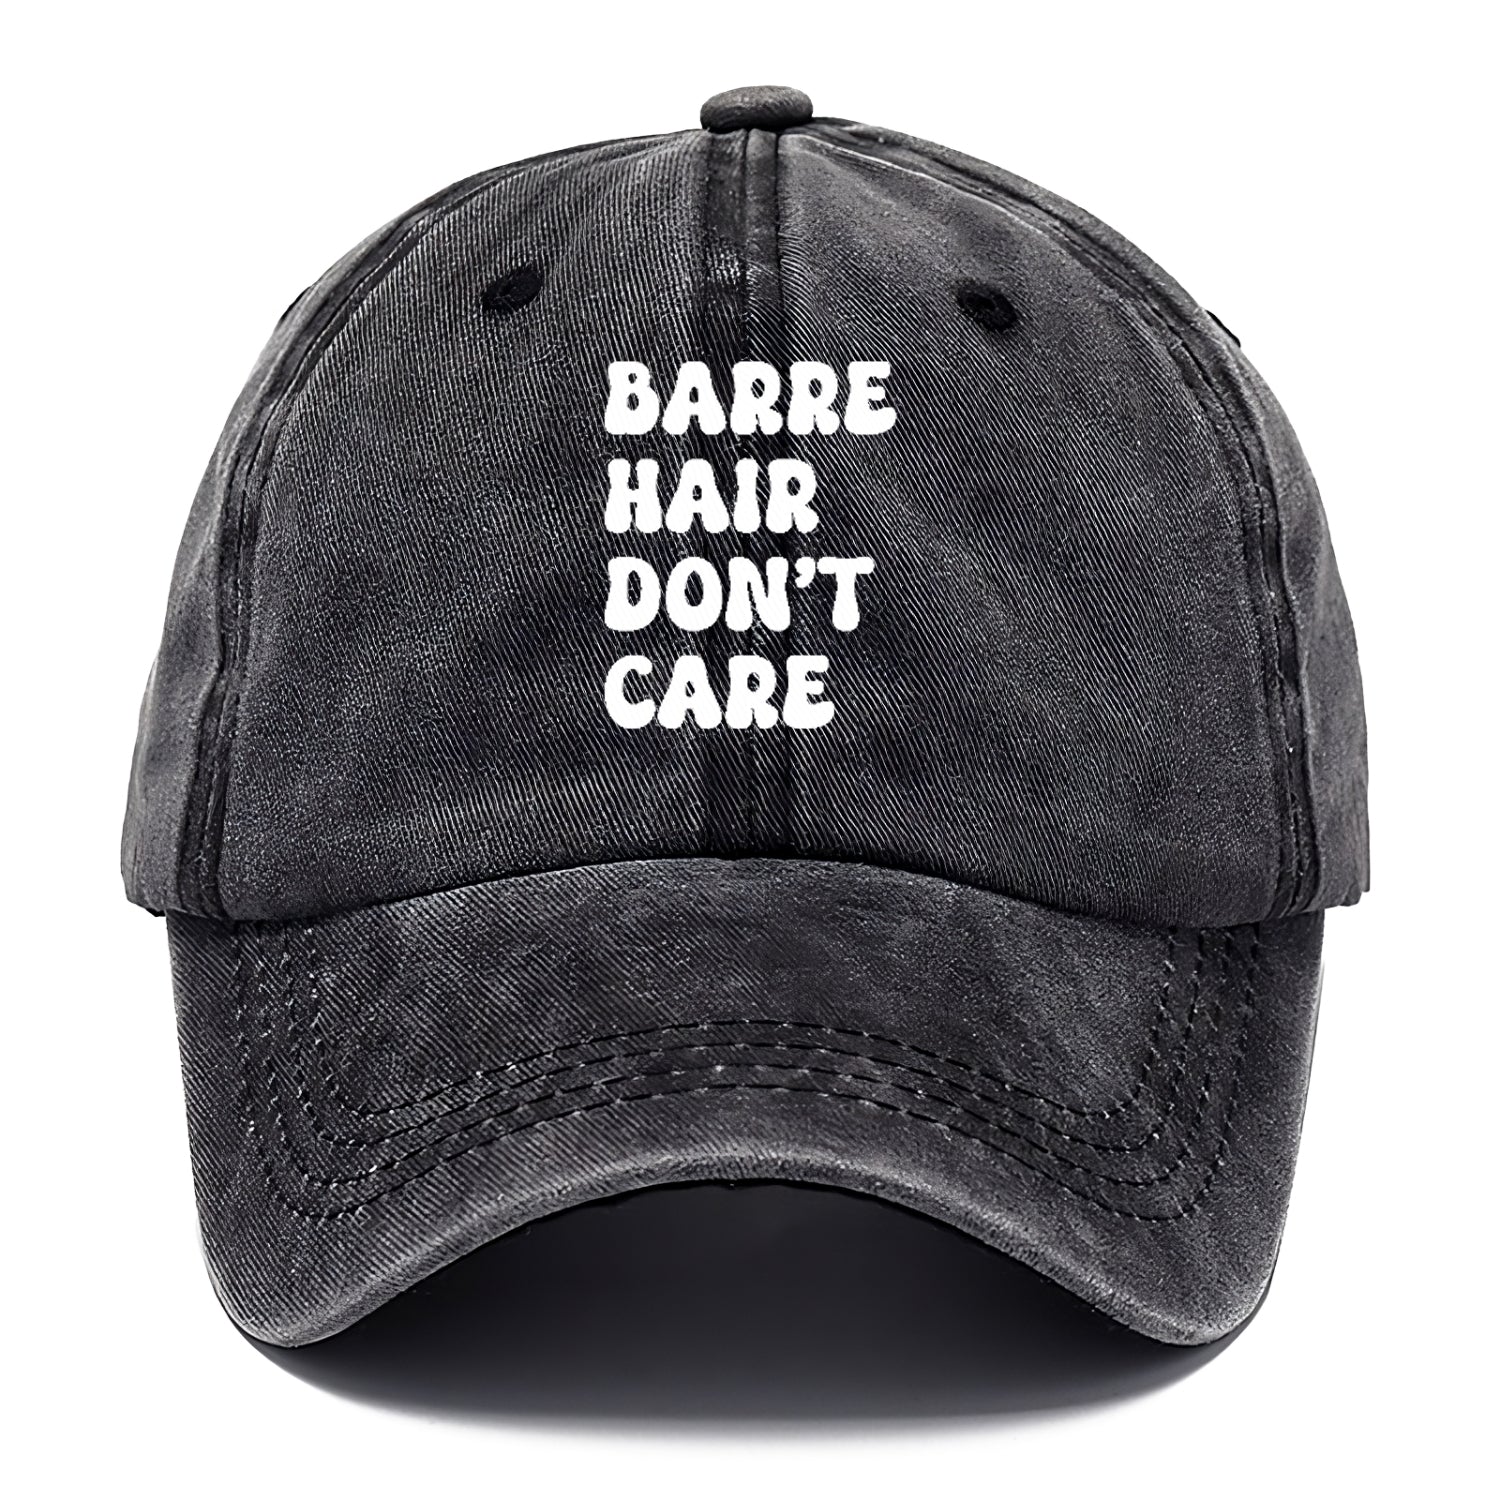 barre hair don't care Hat